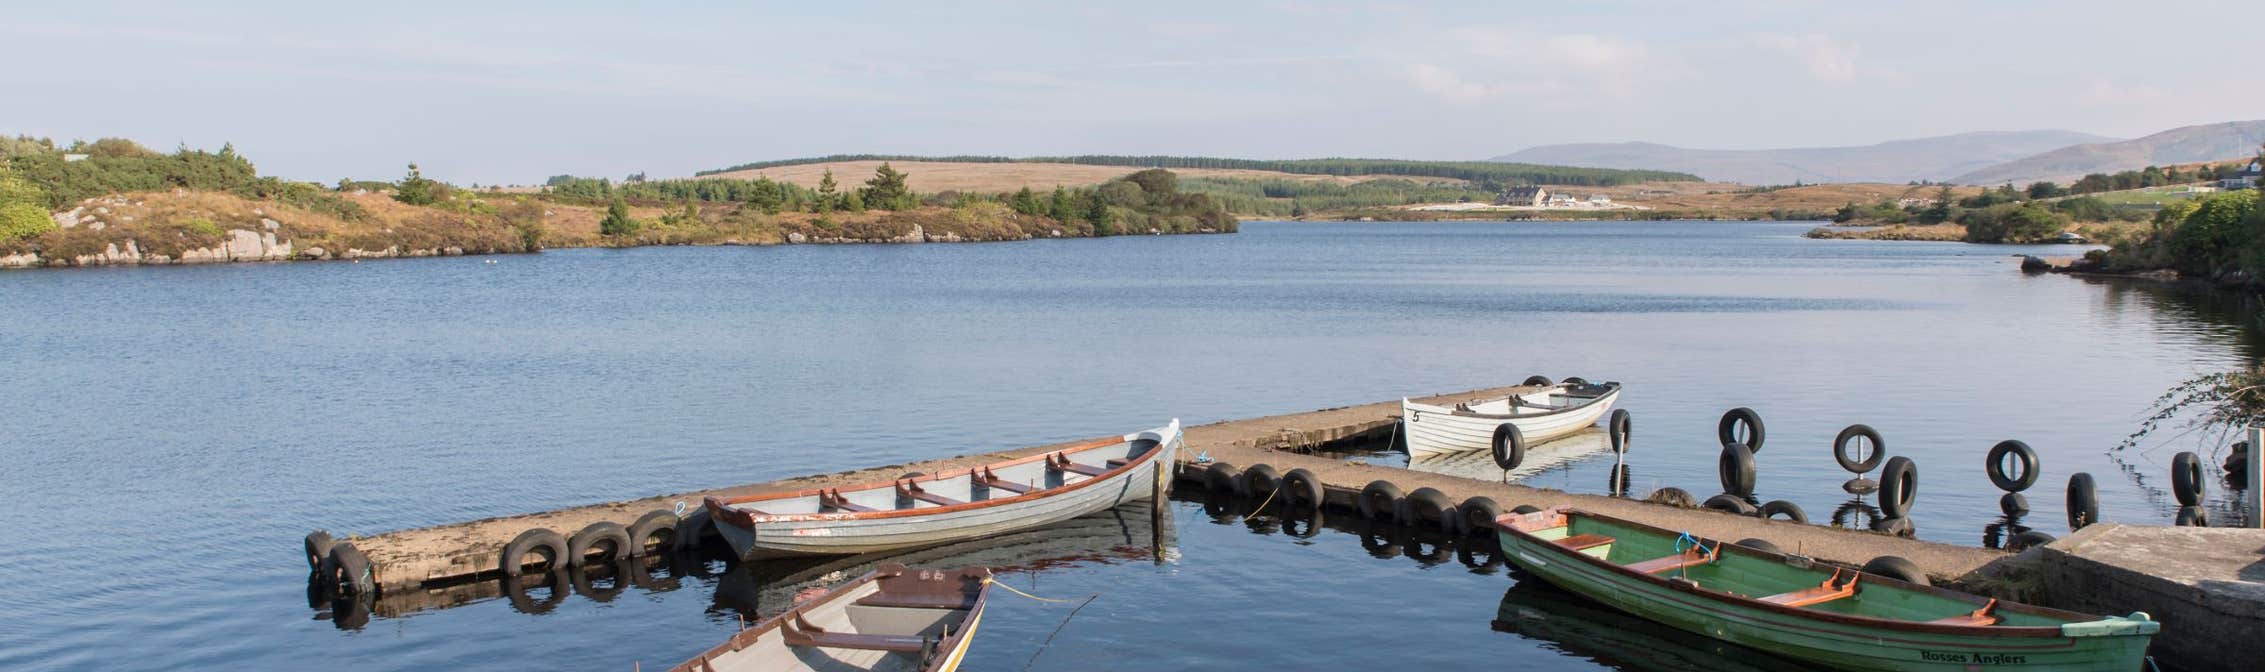 4 boats on a lake in Dungloe in County Donegal